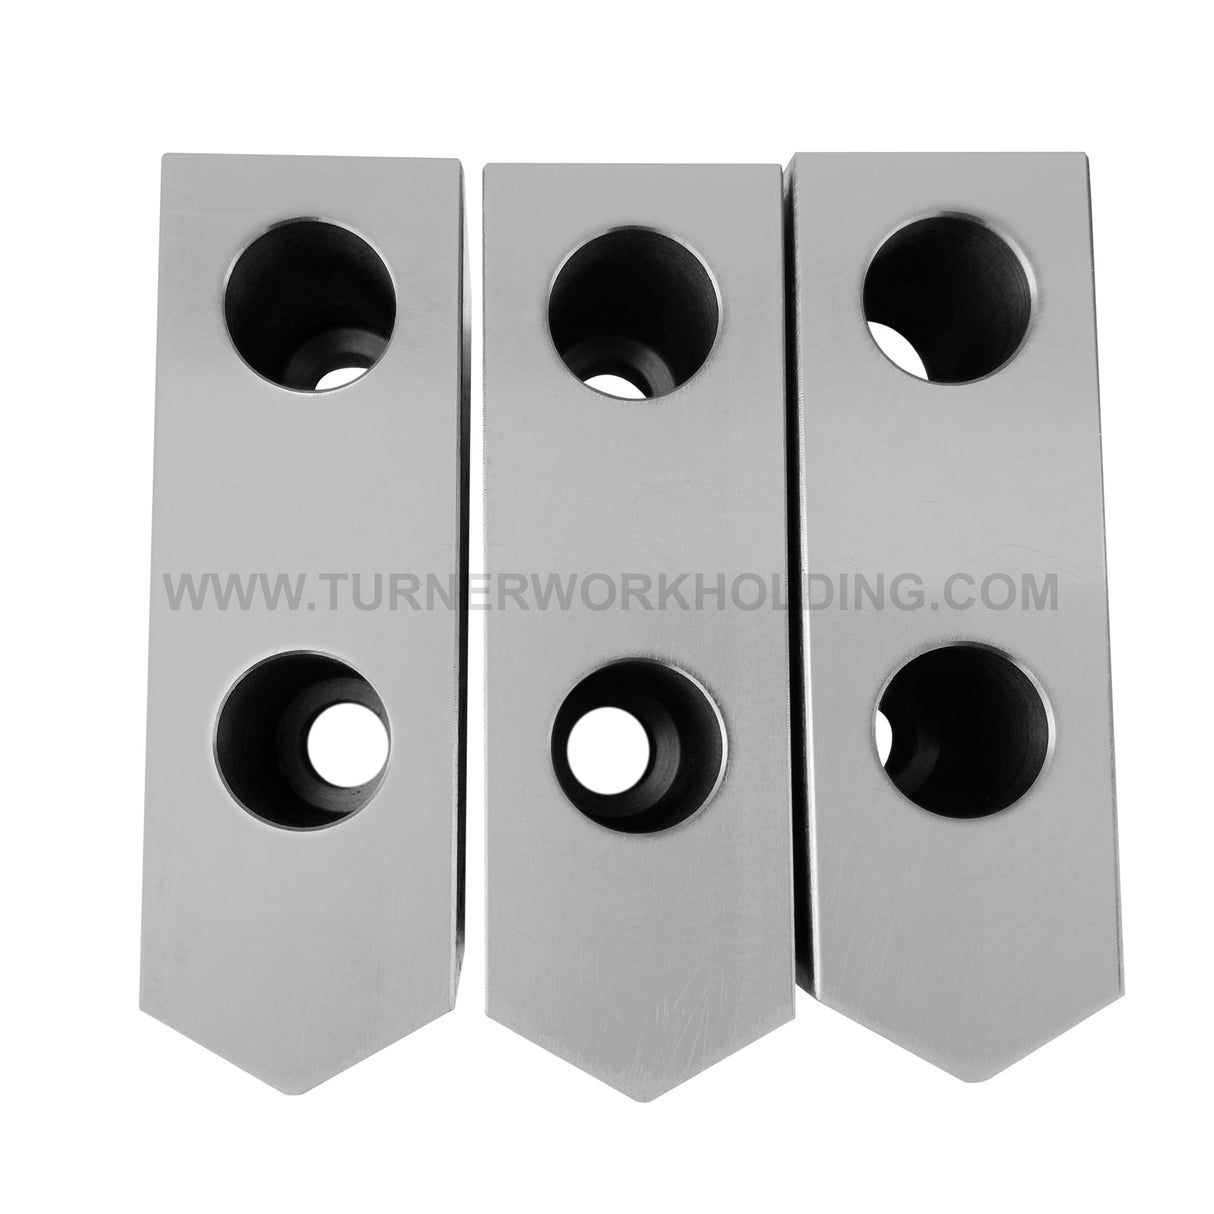 TG-12C-2.0-SP - AMERICAN STANDARD STEEL SOFT JAWS FOR TONGUE & GROOVE 12" CHUCK 2.0" HT (3 PC)